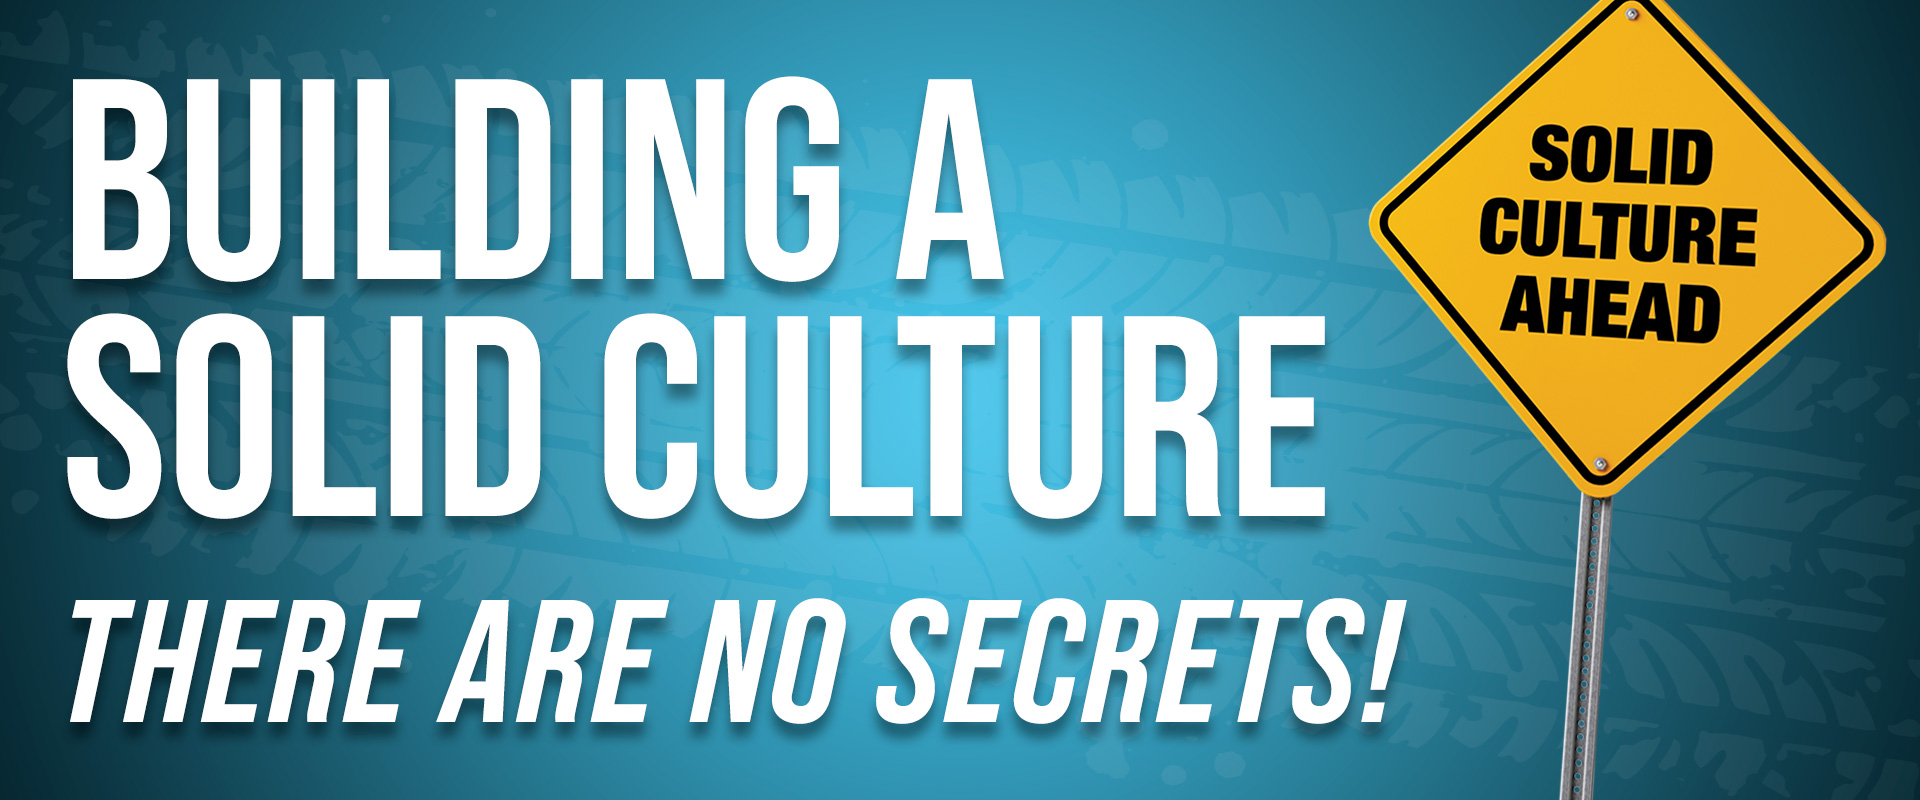 Building a Solid Culture - There are NO Secrets!